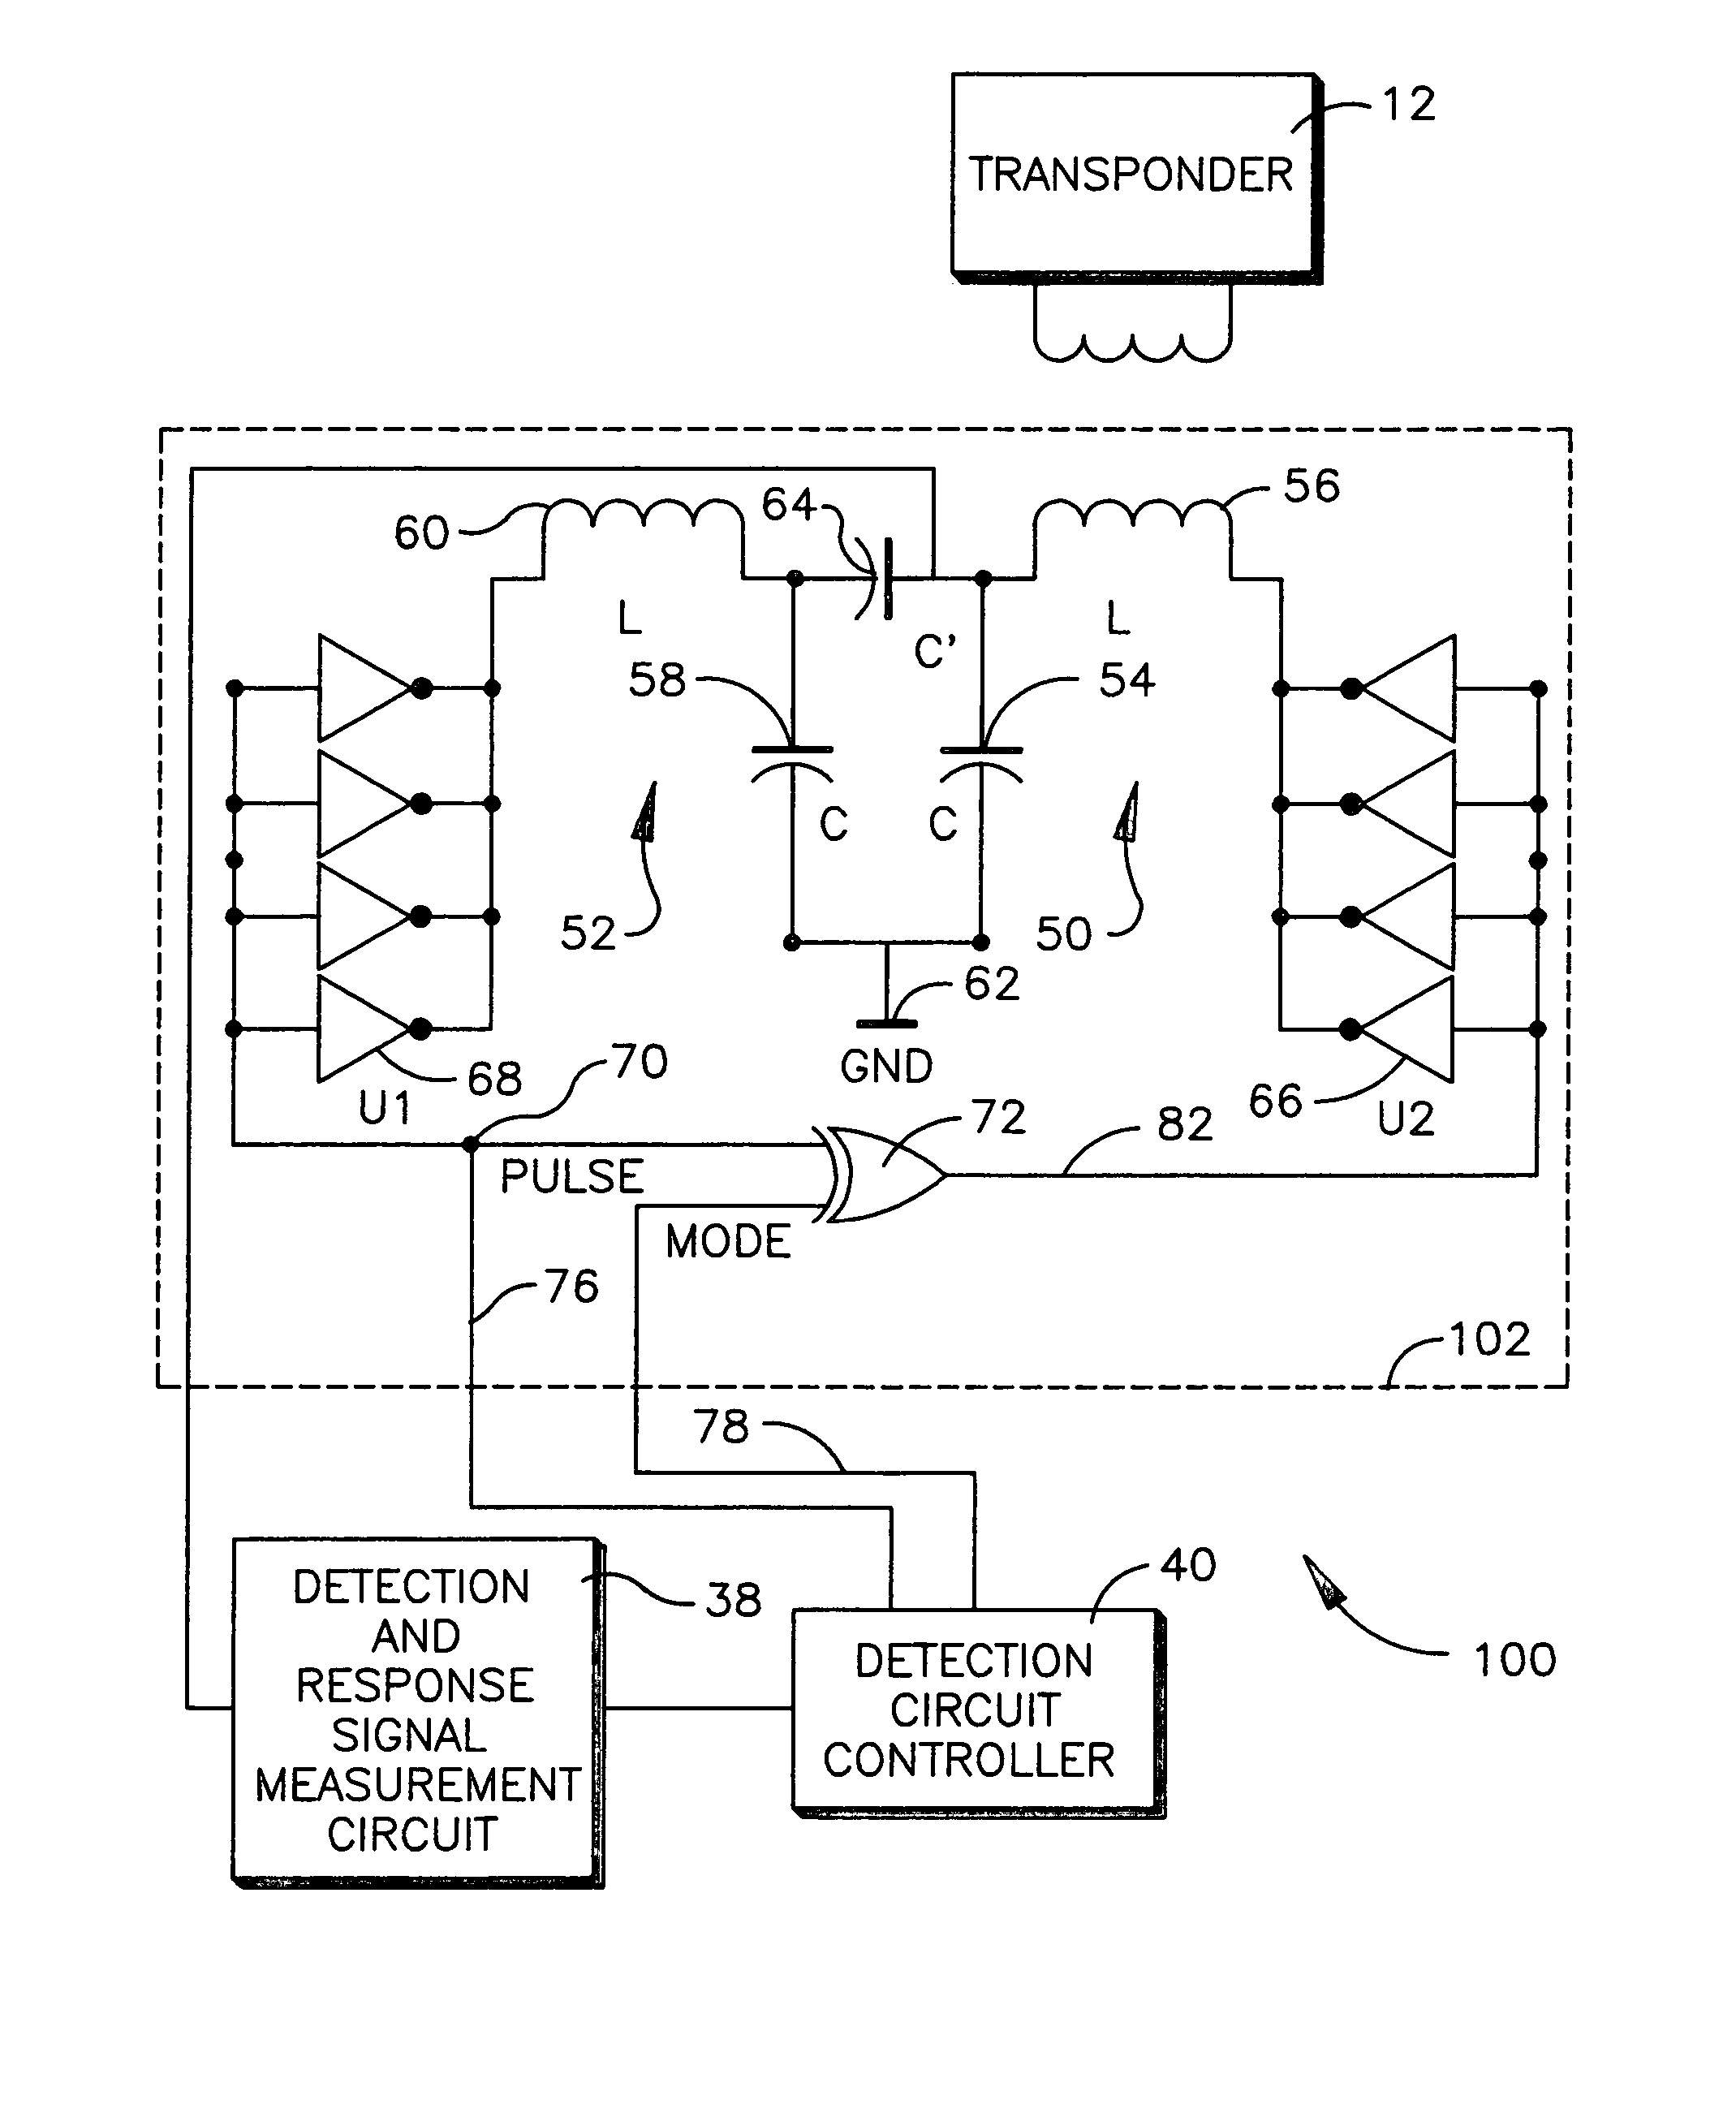 Detection signal generator circuit for an RFID reader